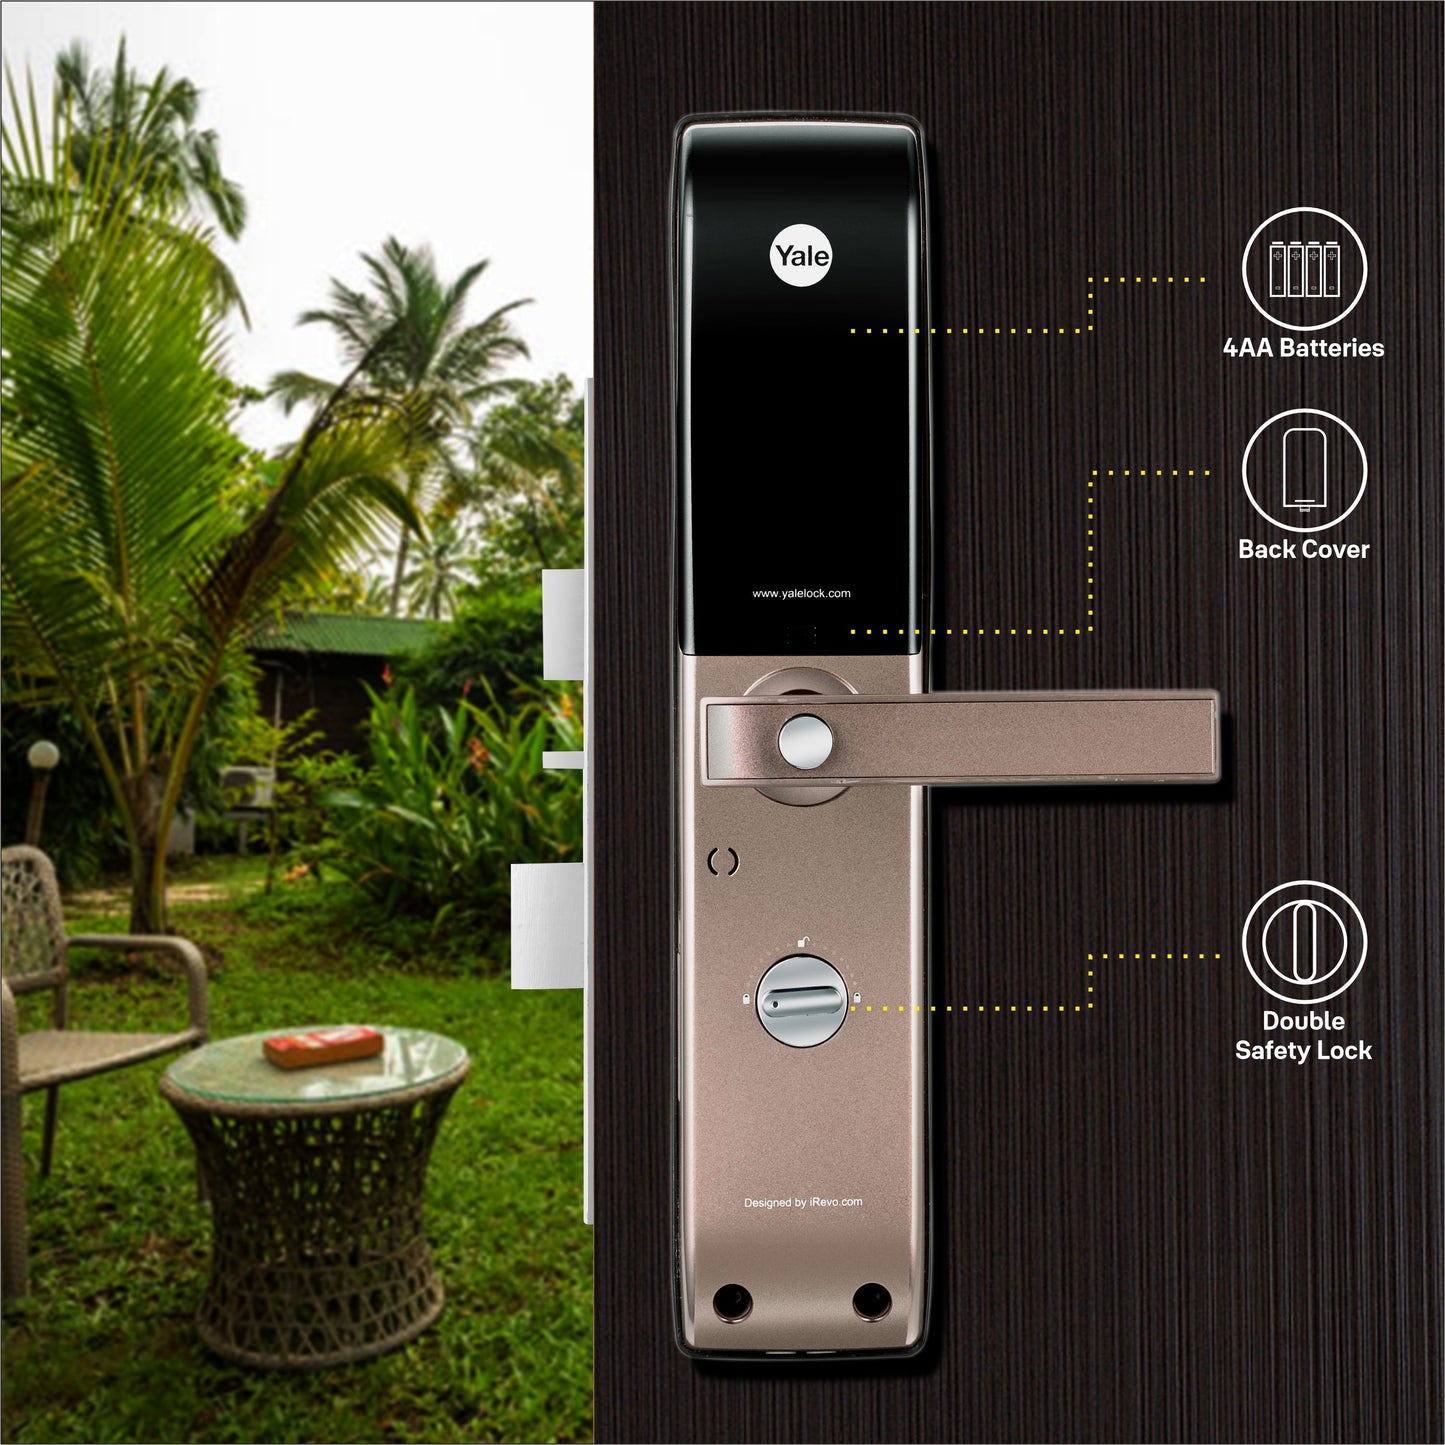 YDM 4115 -A Series, Biometric Smart Lock, Brown with Fingerprint, PIN, manual key and Yale Home App With Bluetooth Module and Wifi Connect Bridge